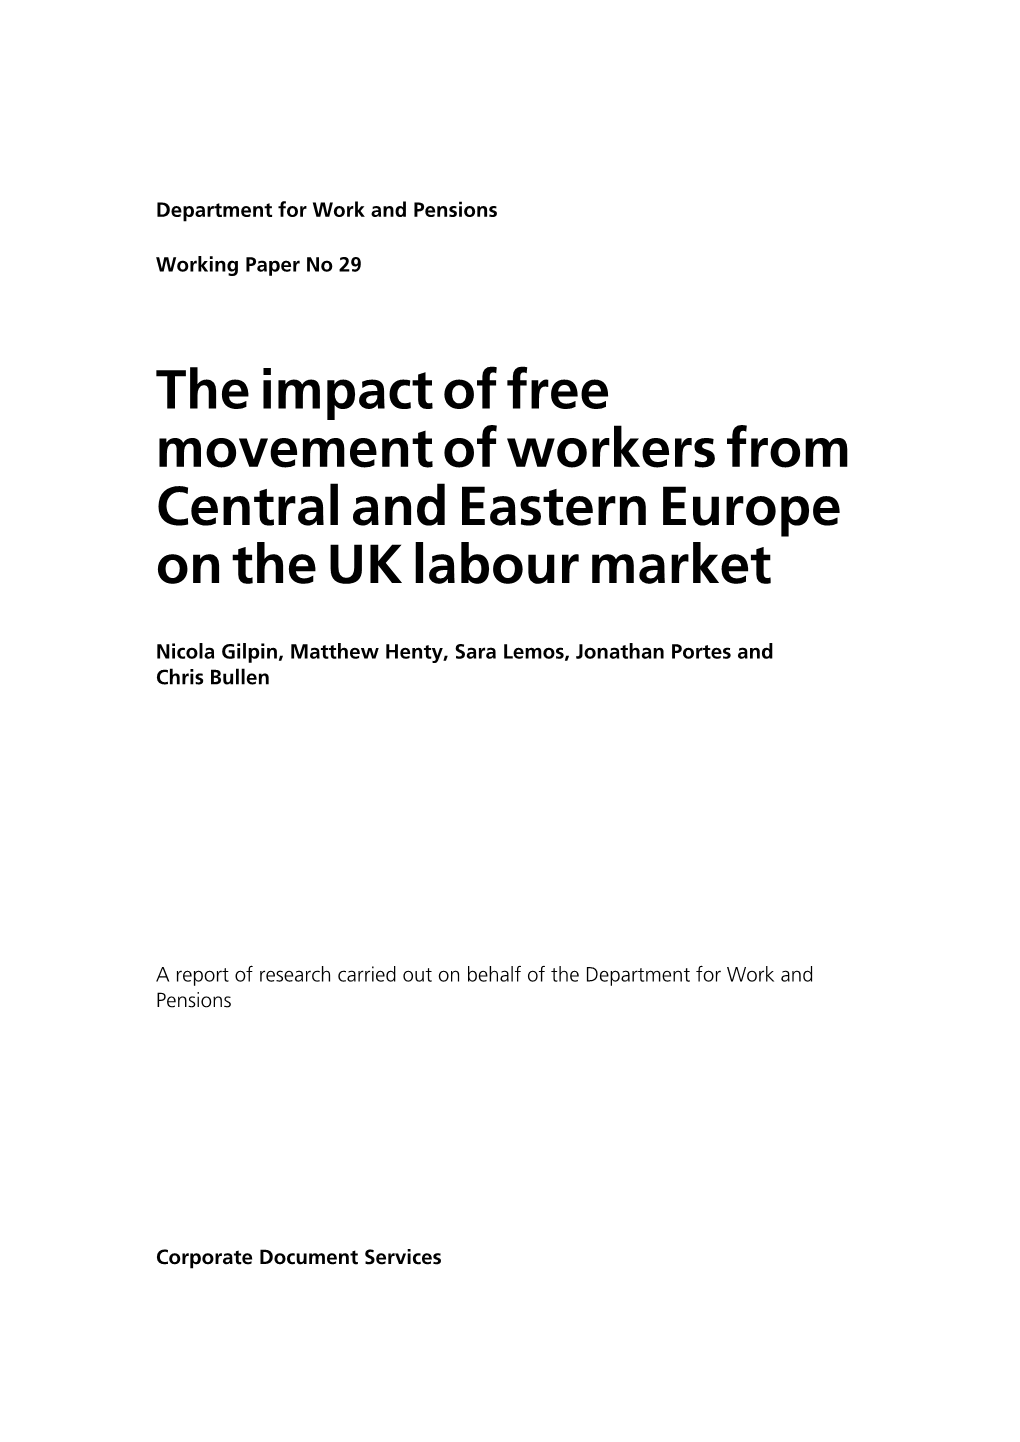 The Impact of Free Movement of Workers from Central and Eastern Europe on the UK Labour Market